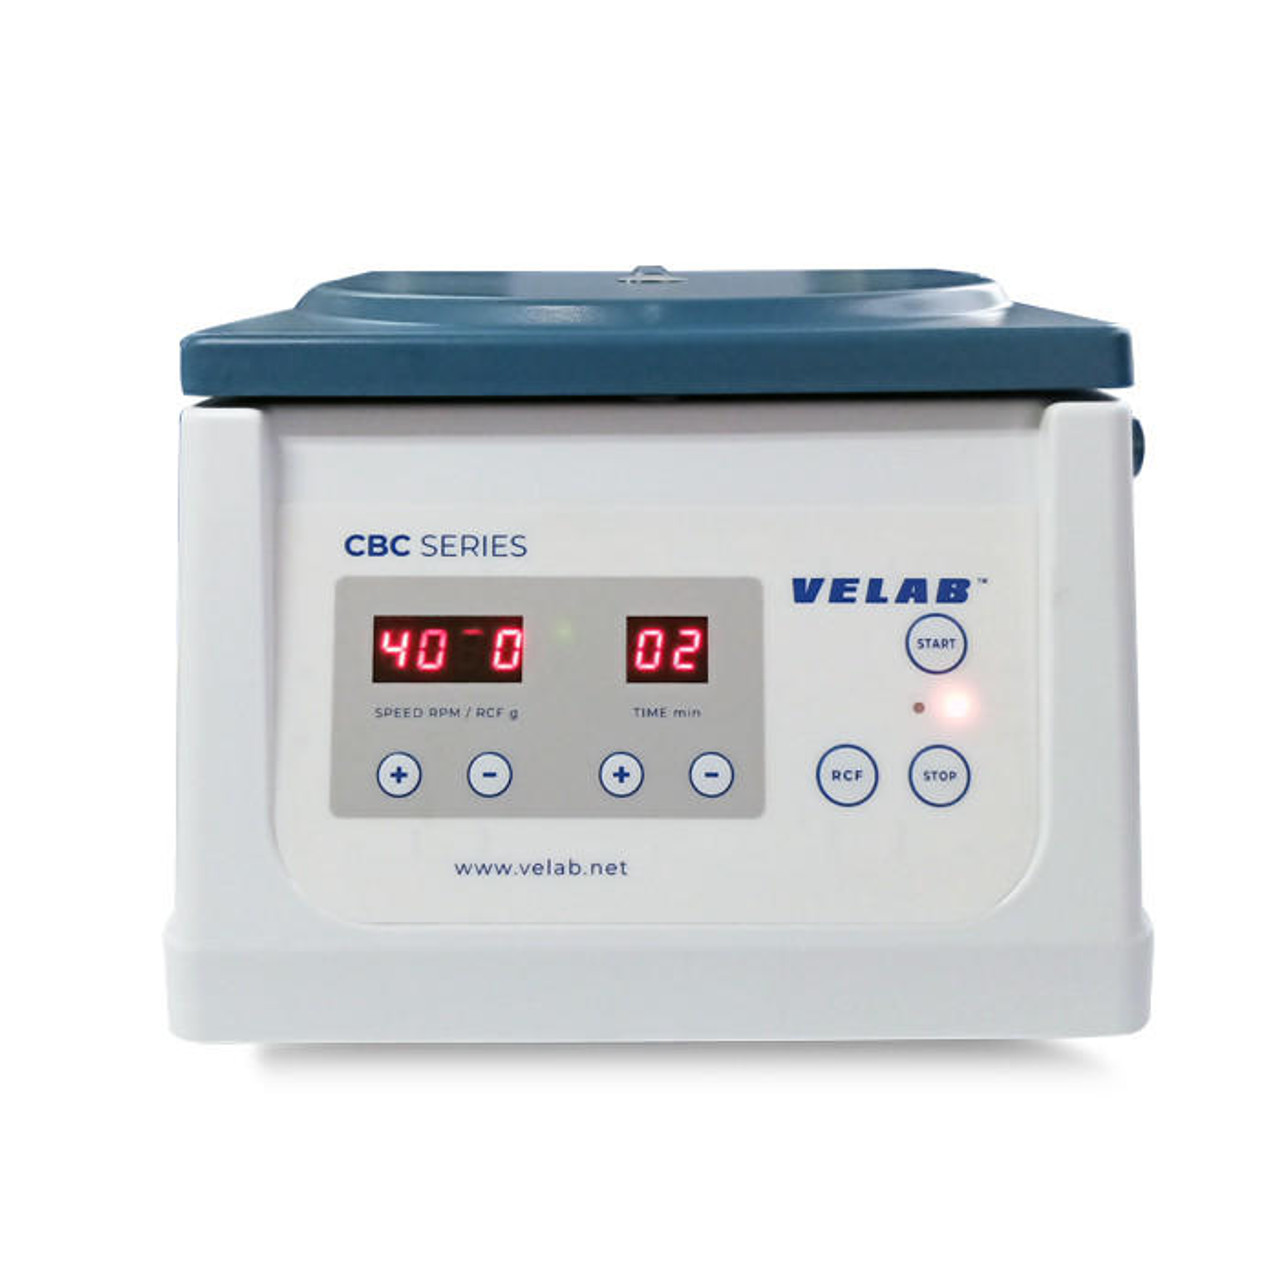 Dropship Electric Centrifuge Machine 4000 RPM 110V 60Hz 100ml X 4 Tubes  Benchtop Lab Centrifuge Machine W/Timer And Speed Control For Blood PRP to  Sell Online at a Lower Price